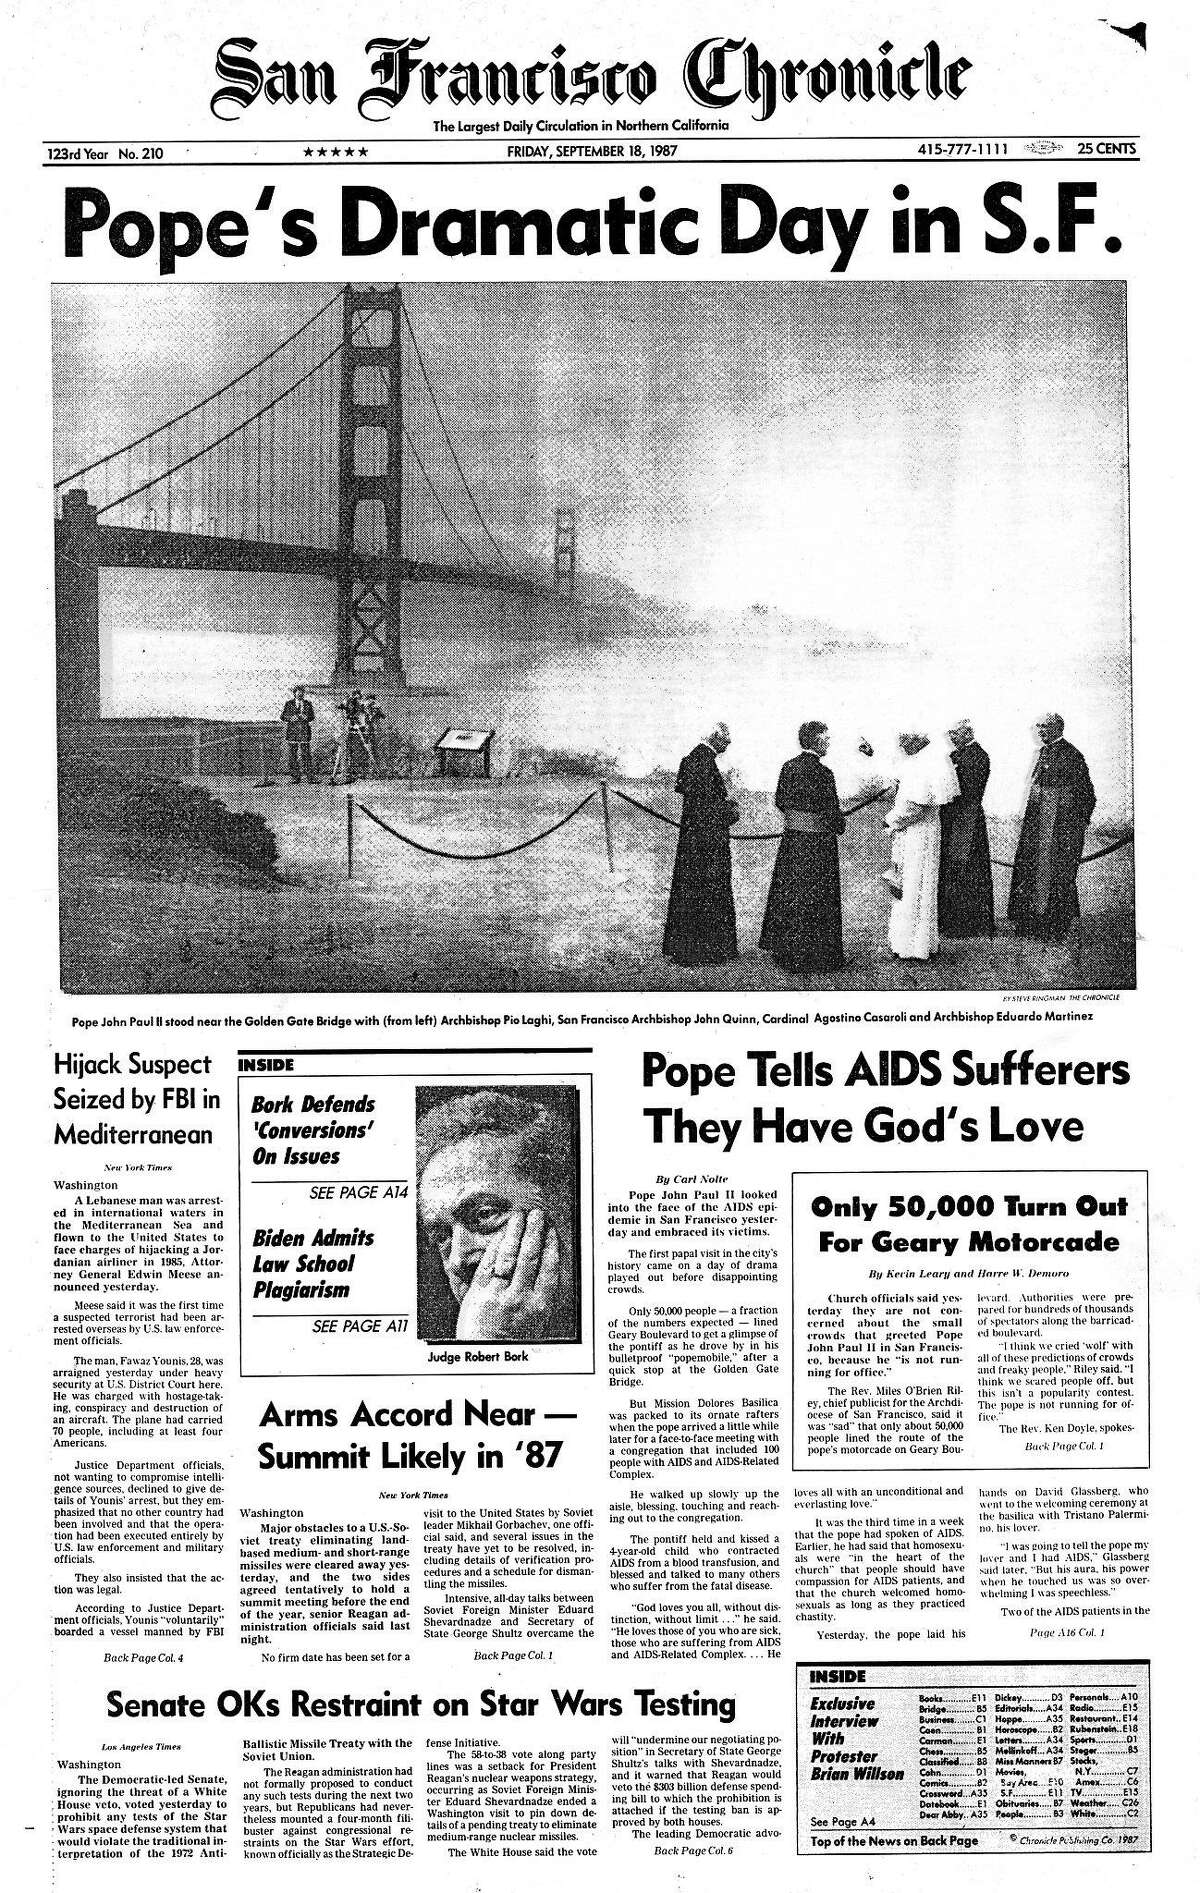 Historic Chronicle front page September 18, 1987 Pope John Paul II visits the Golden Gate Bridge during his visit to San Francisco